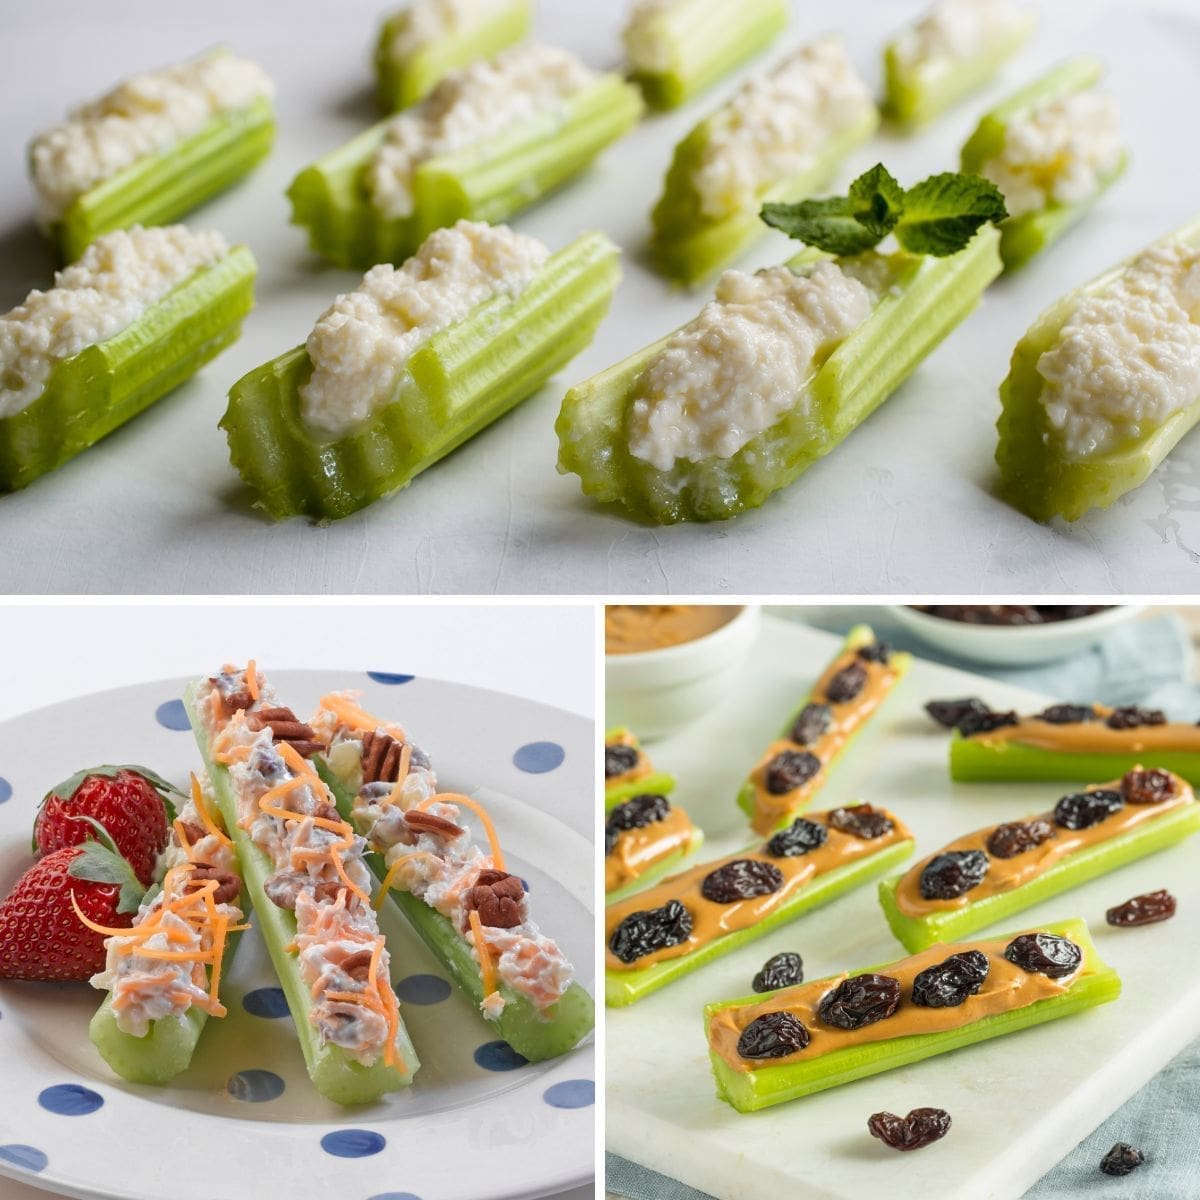 13 Celery Appetizers That Will Make Everyone Smile